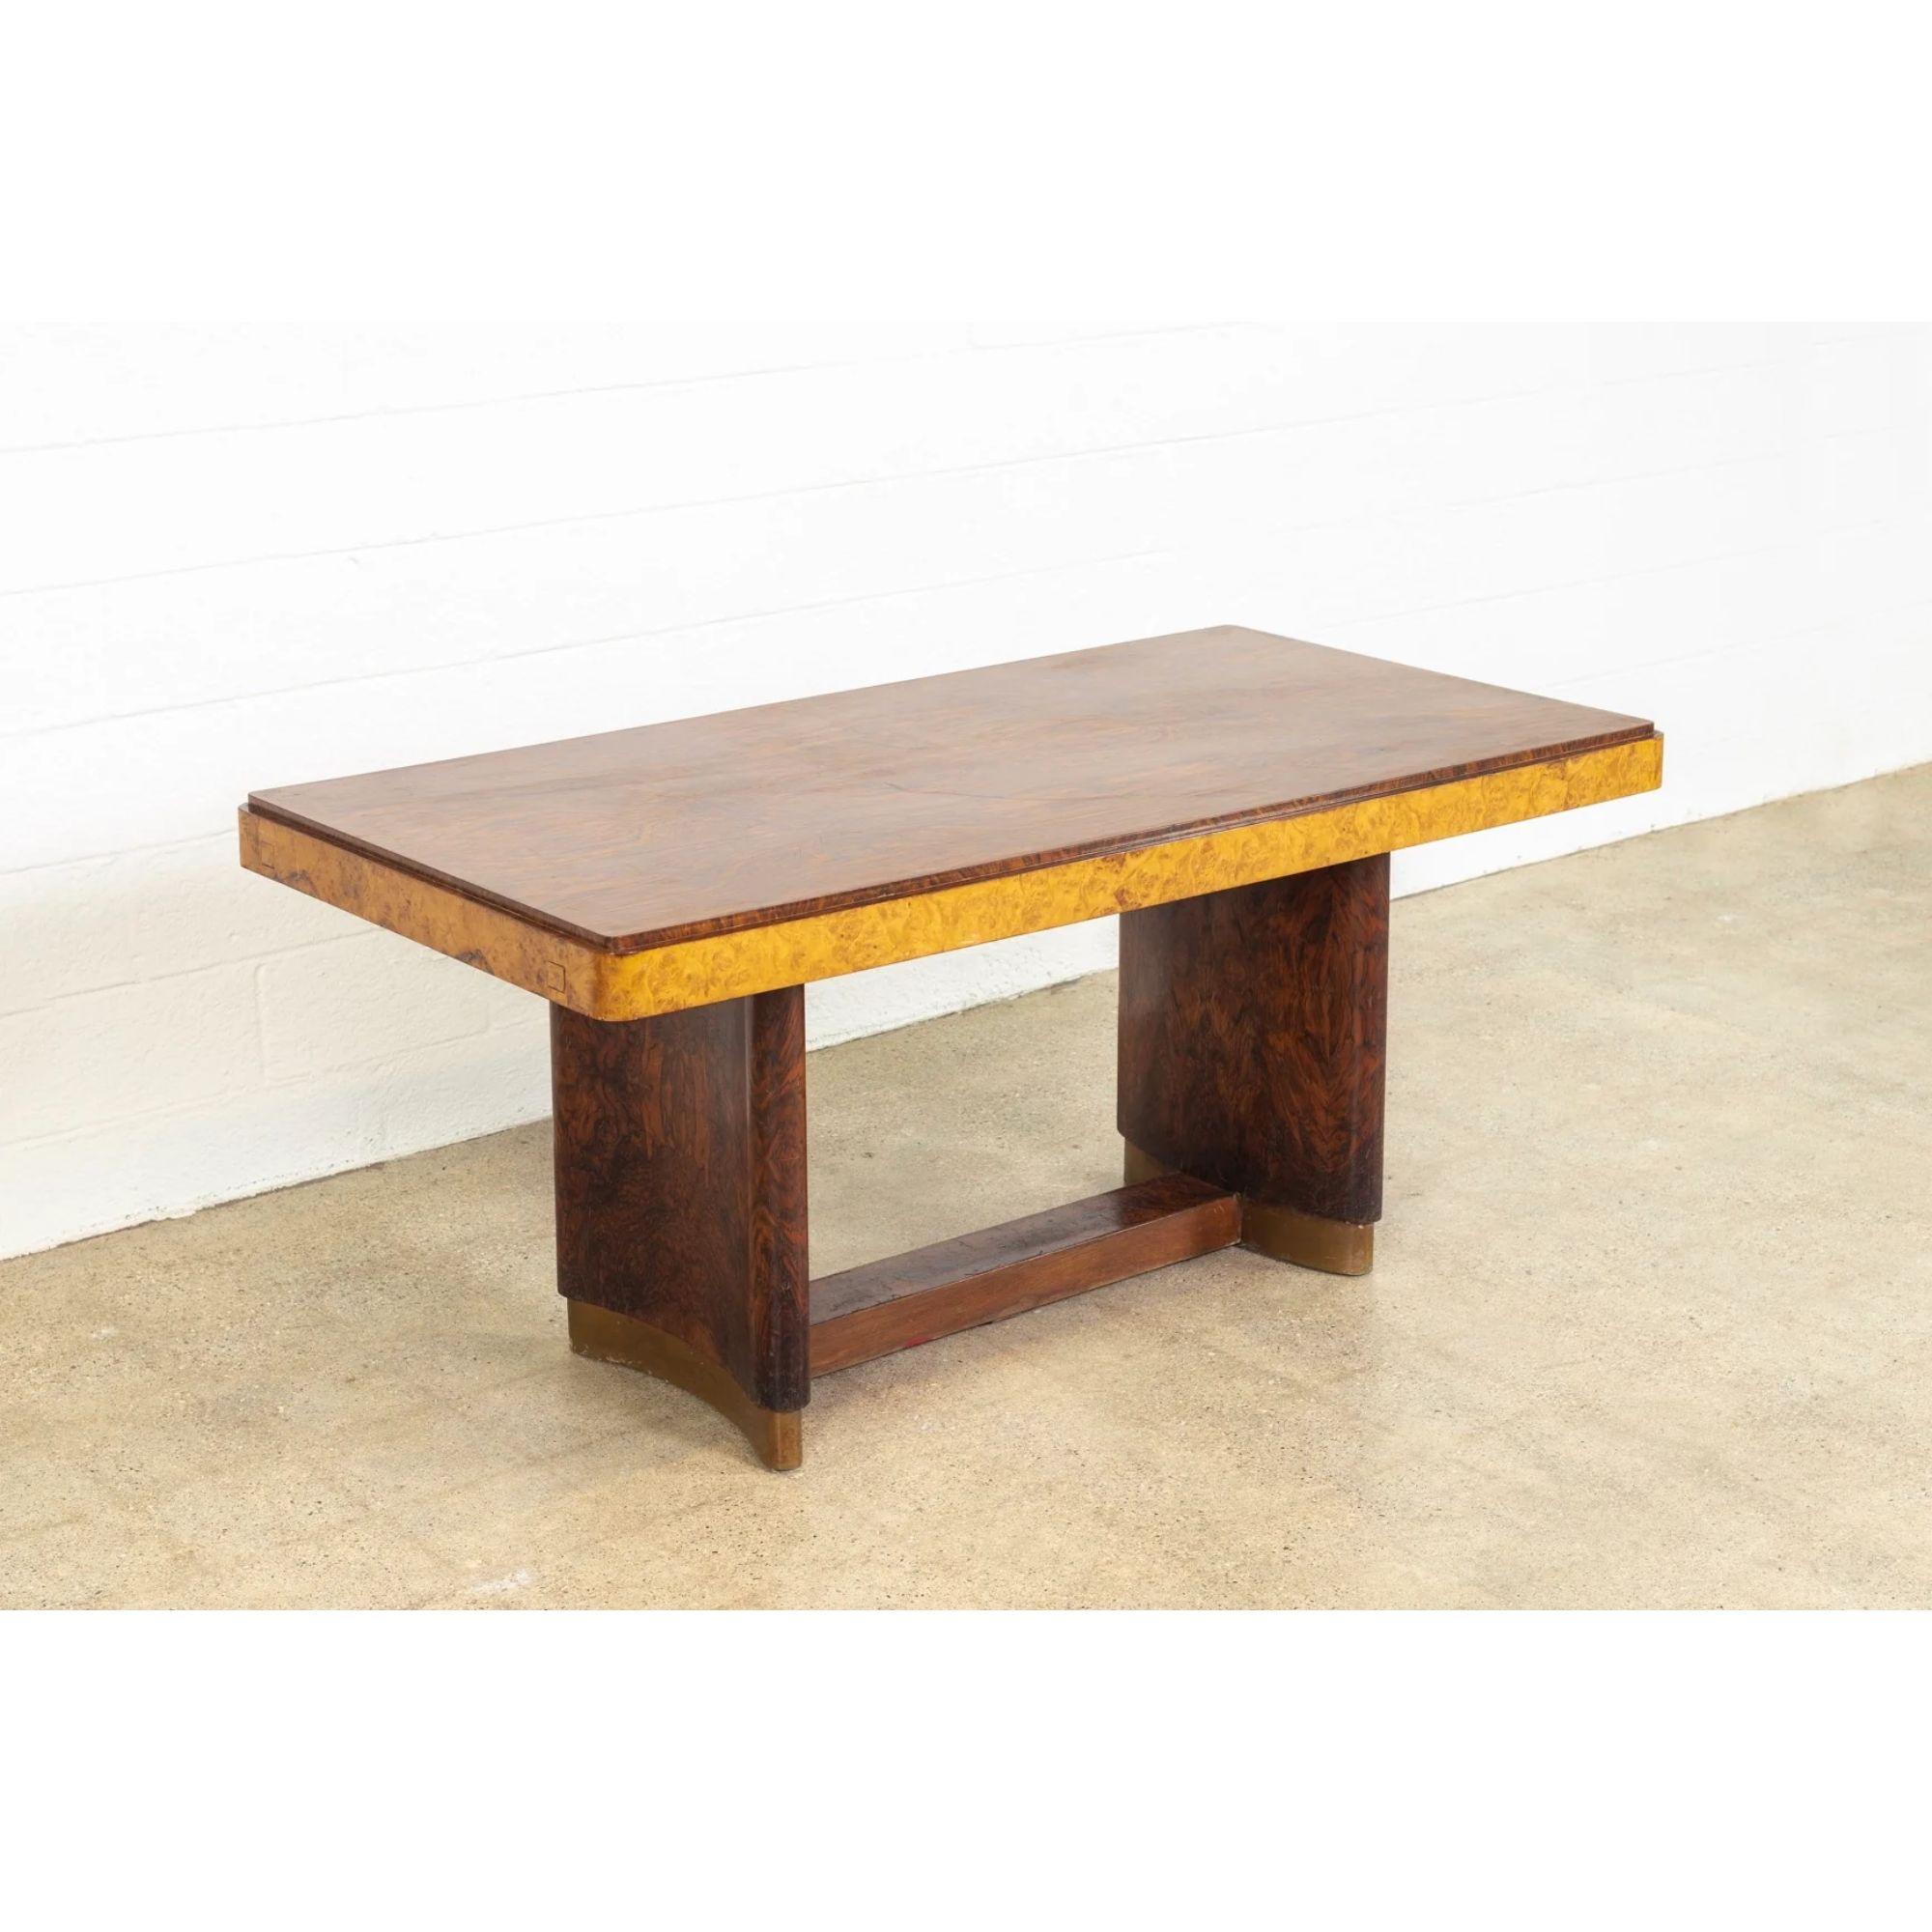 Unknown Antique Art Deco Dining Table in Burl Rosewood & Maple, 1930s